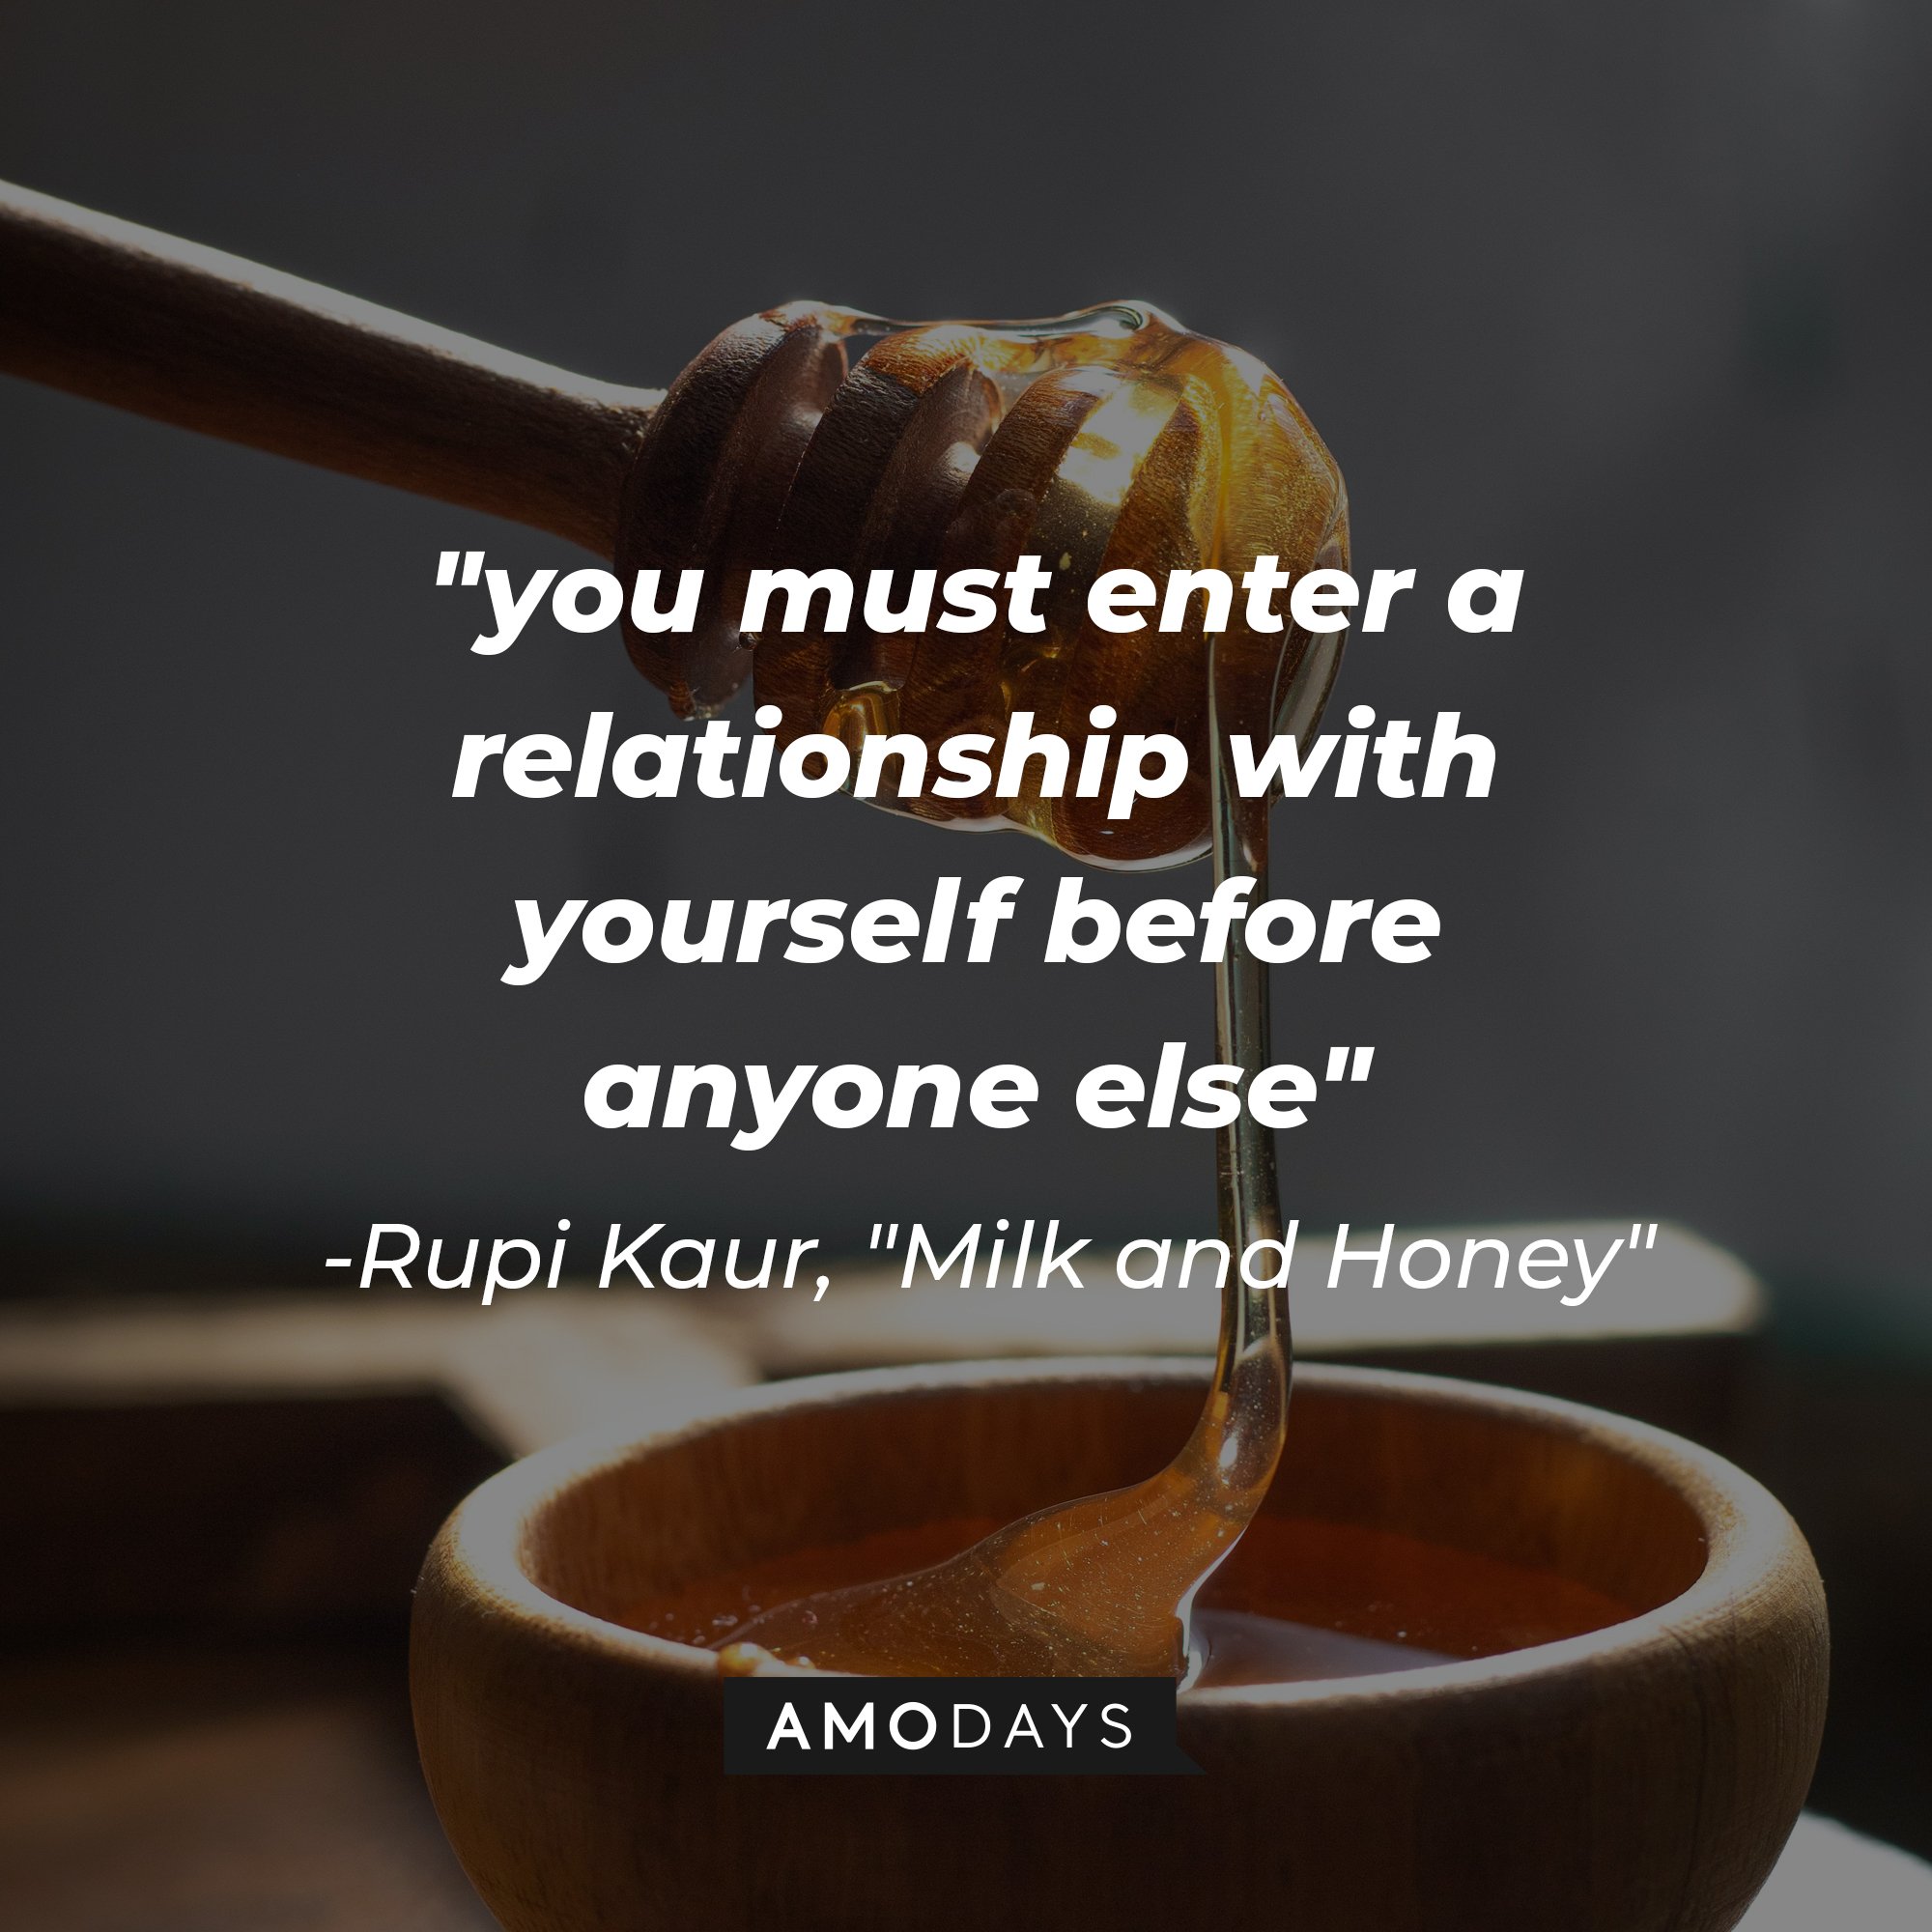 Rupi Kaur's "Milk and Honey" quote: "you must enter a relationship with yourself before anyone else" | Image: AmoDays